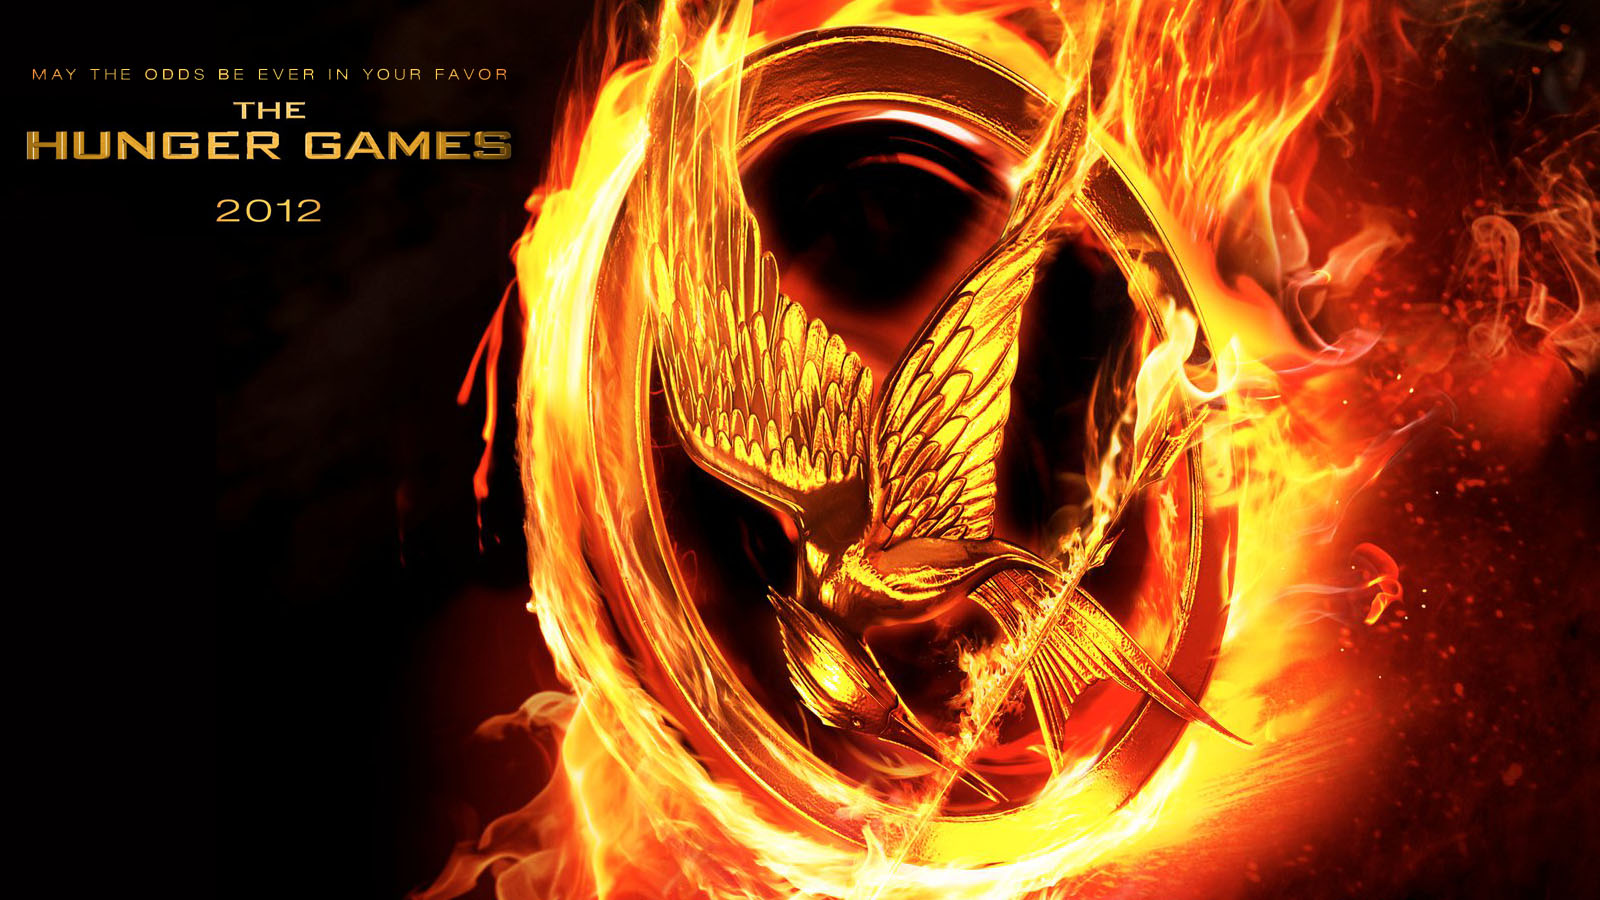 The Hunger Games Movie Poster Wallpaper